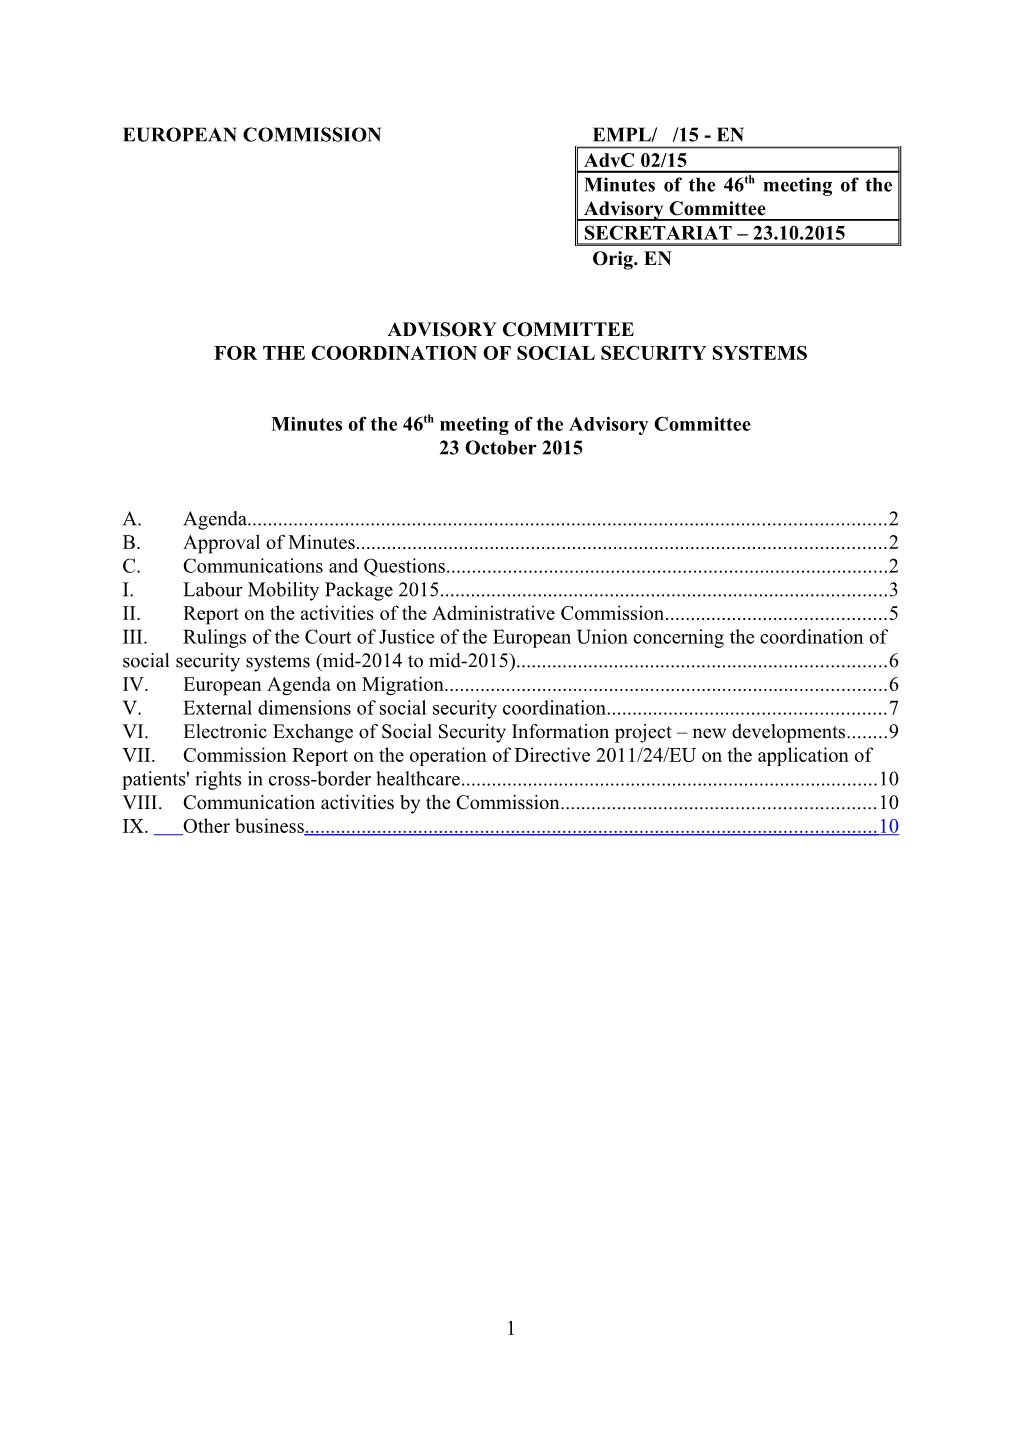 Minutes of the 46Thmeeting of the Advisory Committee